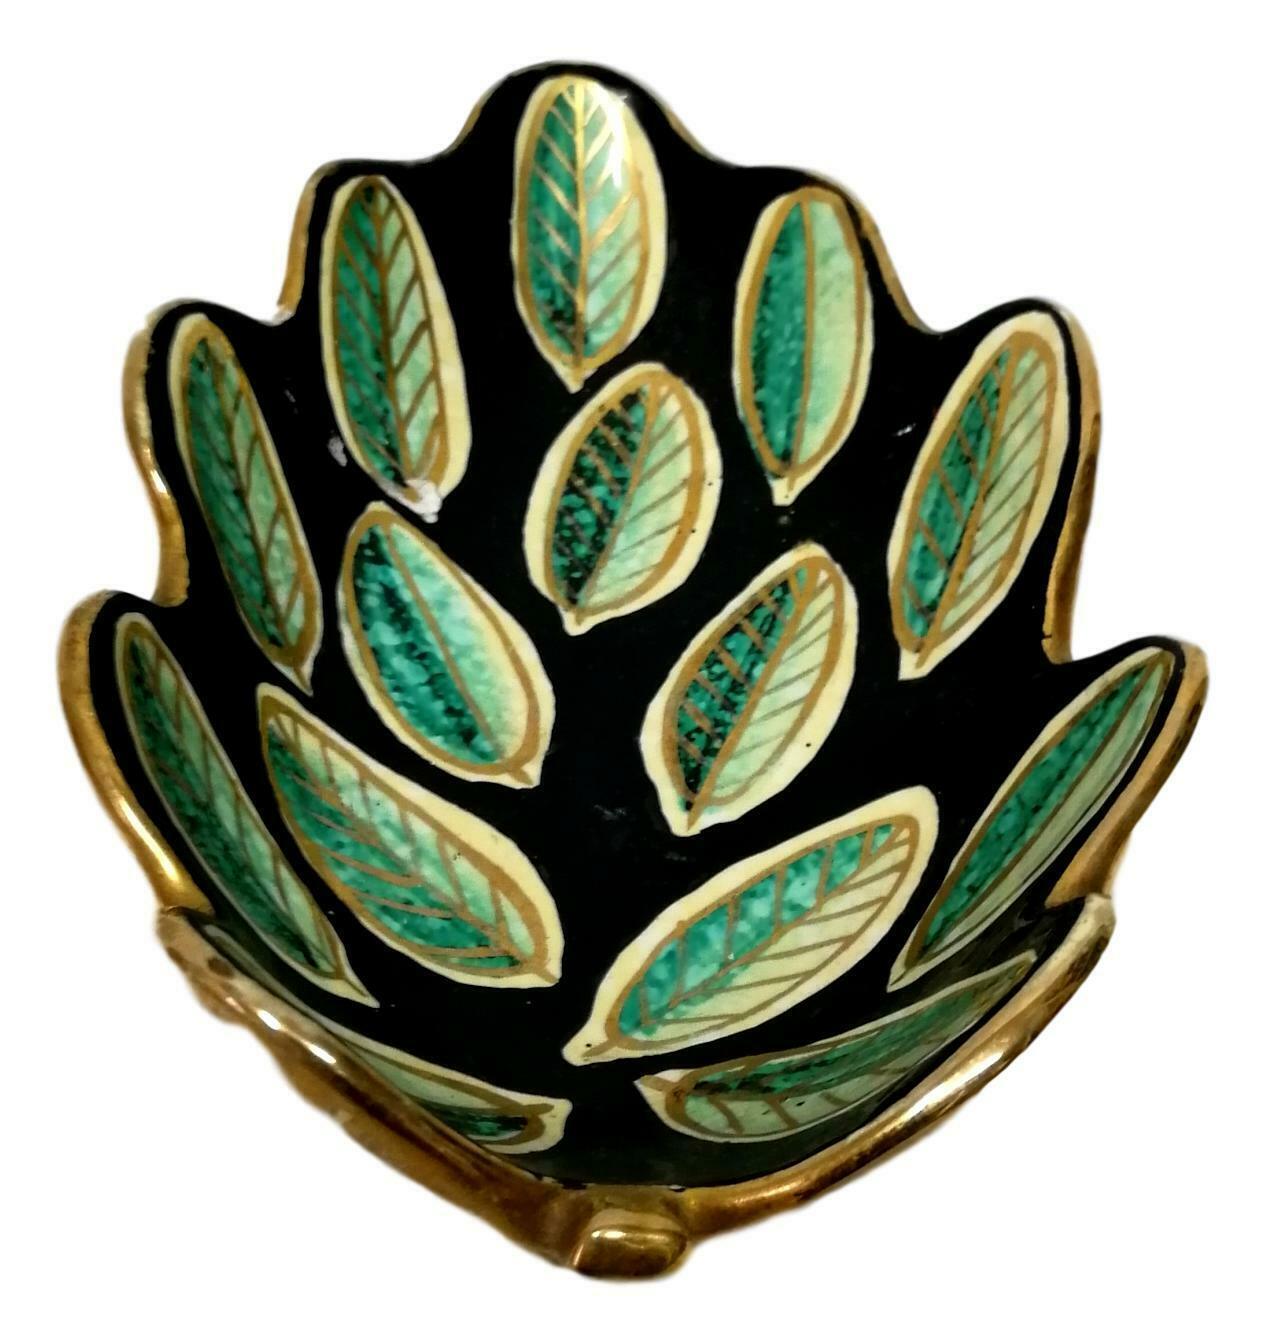 container bowl, centerpiece in polychrome ceramic, Dante Baldelli production, 1940s, città di castello - Italy

leaf-shaped, in shades of black, light green and emerald, finishes in pure gold,

It measures 18.5 cm by 11 cm, in very good storage